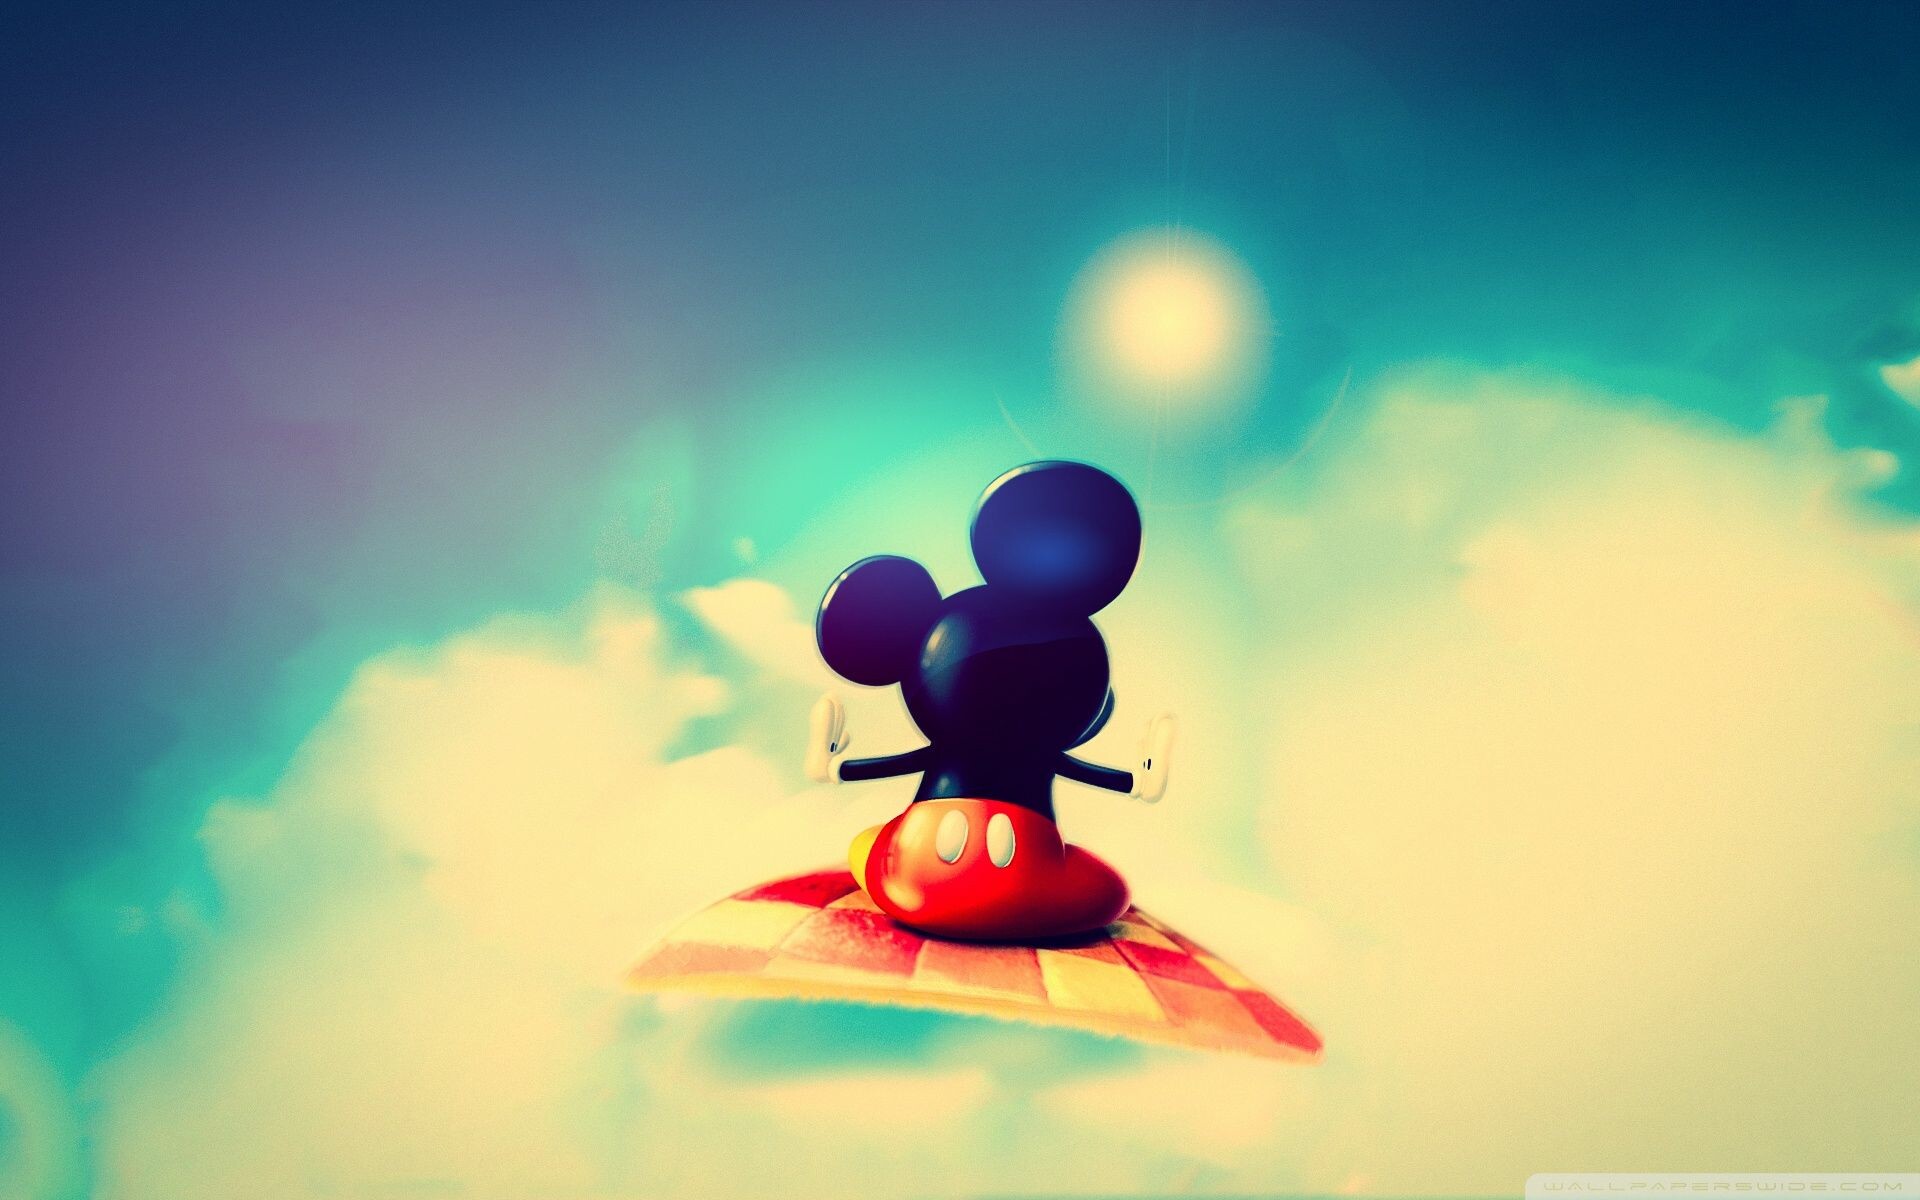 Disney Android 4k Wallpapers - Wallpaper Cave